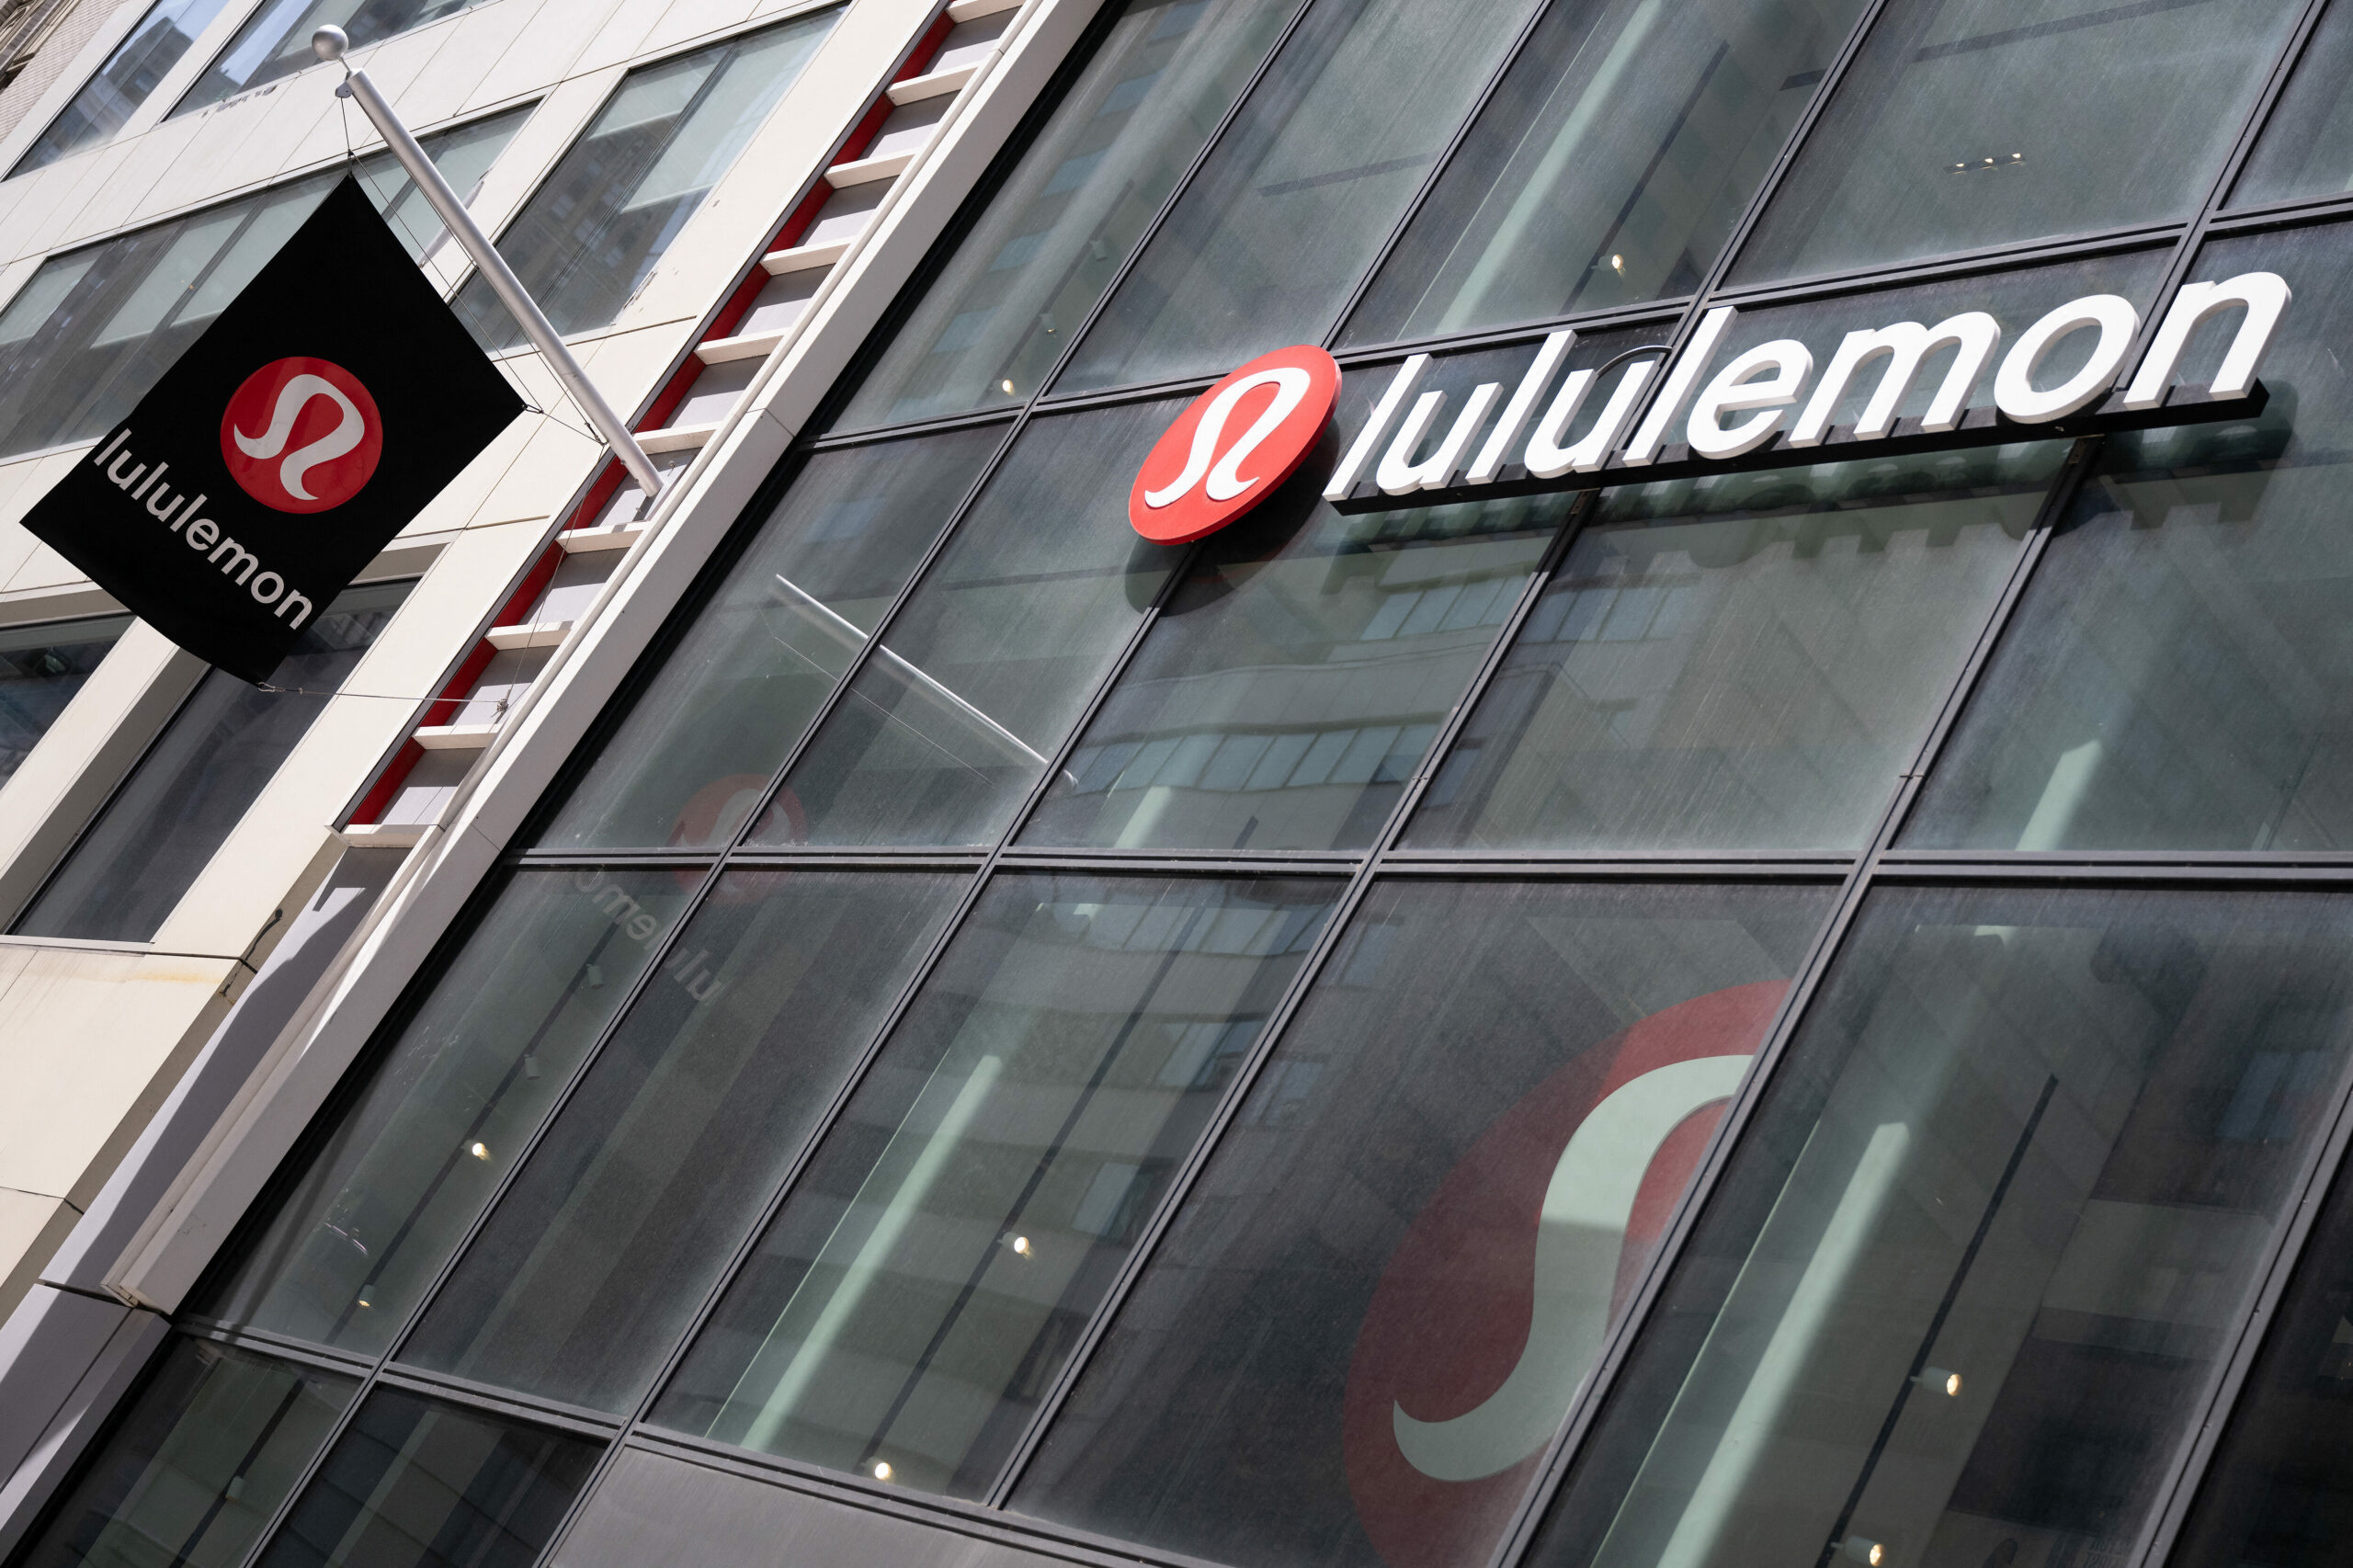 Lululemon Responds But Can They Go Beyond A Press Release?